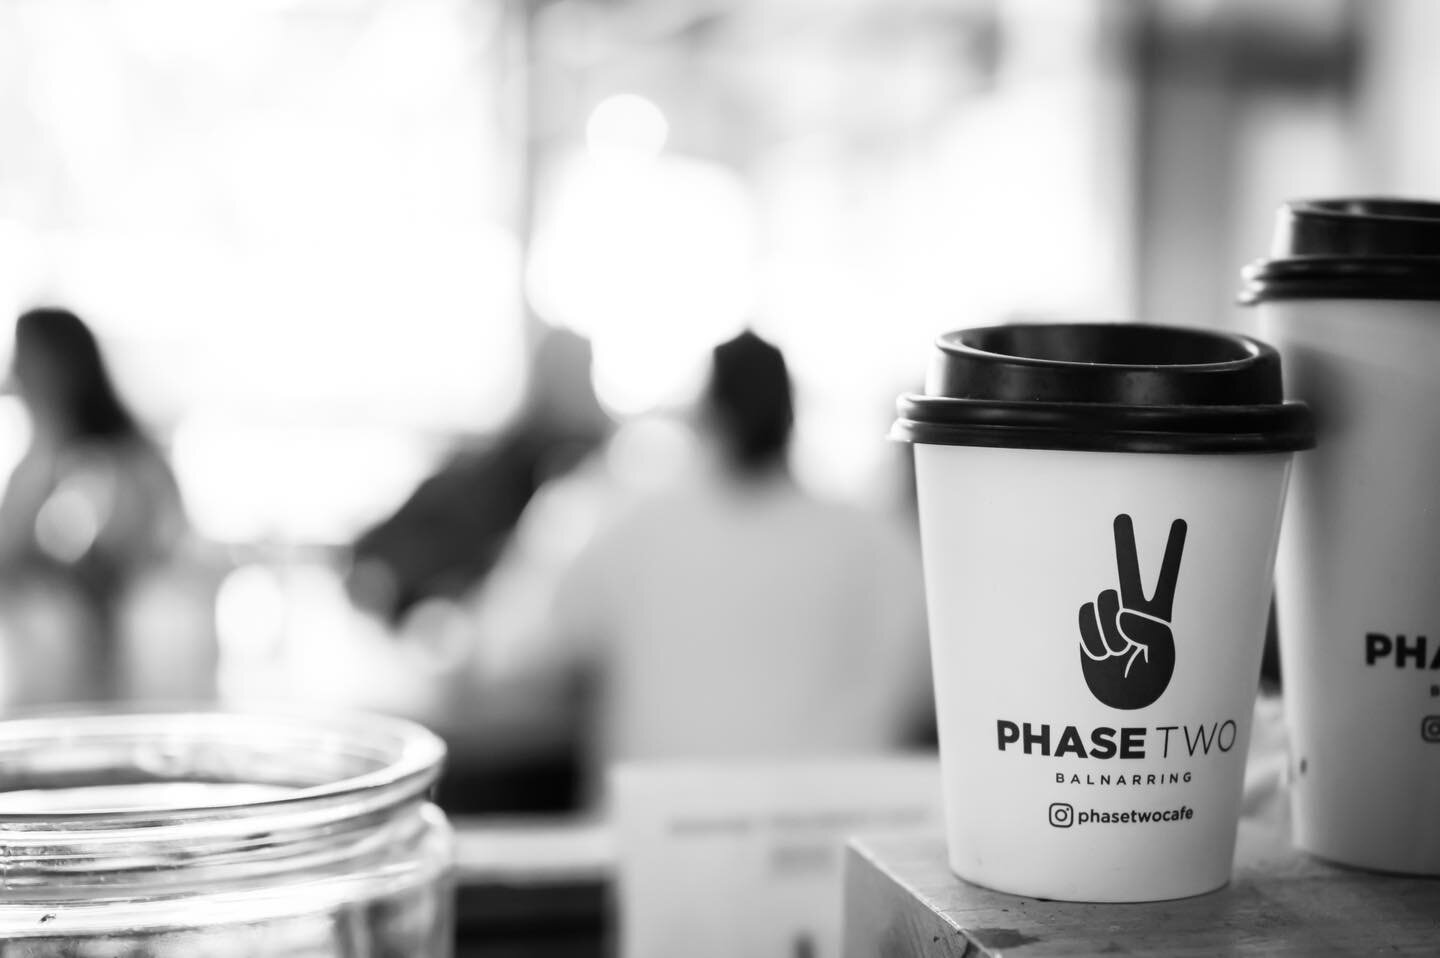 Embrace that midweek hustle with a latte in hand 🐪☕️ 

#brunching #balnarring #coffeeshop #balnarringbeach #goodfood #cafe #phasetwo #morningtonpeninsula #coffeetime #barista #Melbourne #brunchtime #broadsheetmelbourne #melbournecafe #coffee #phaset